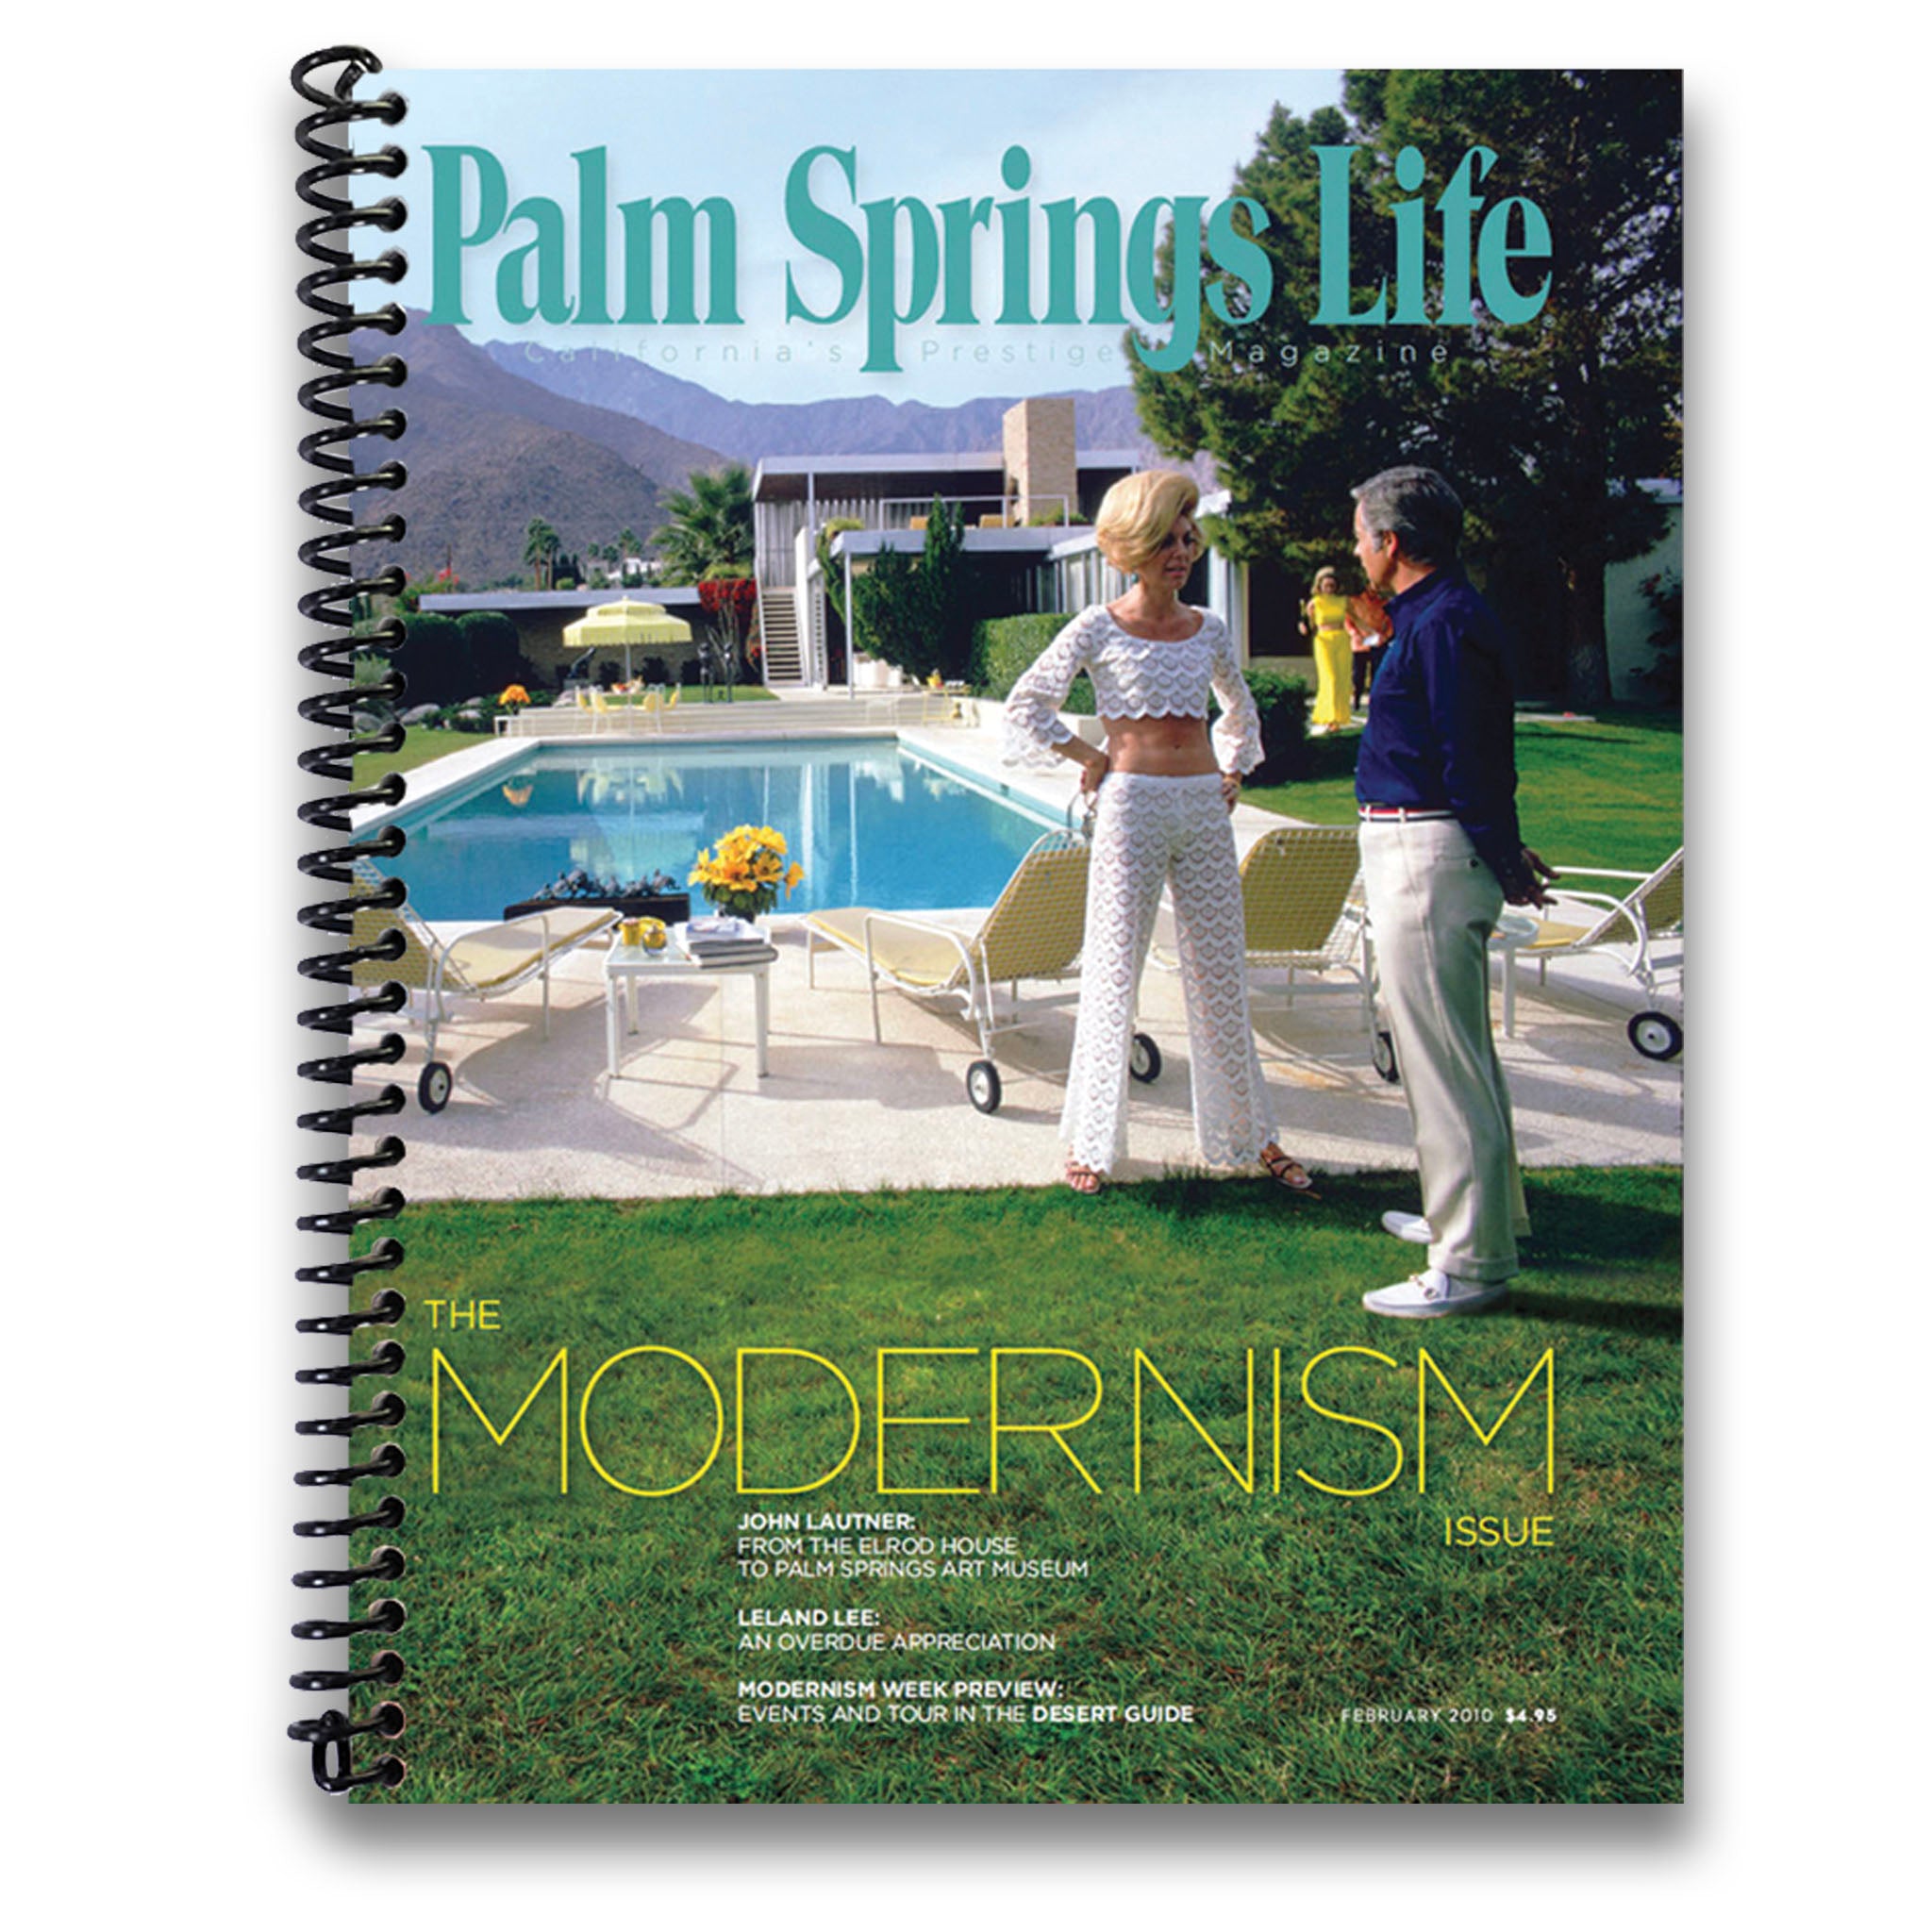 Palm Springs Life Notebook - February 2010